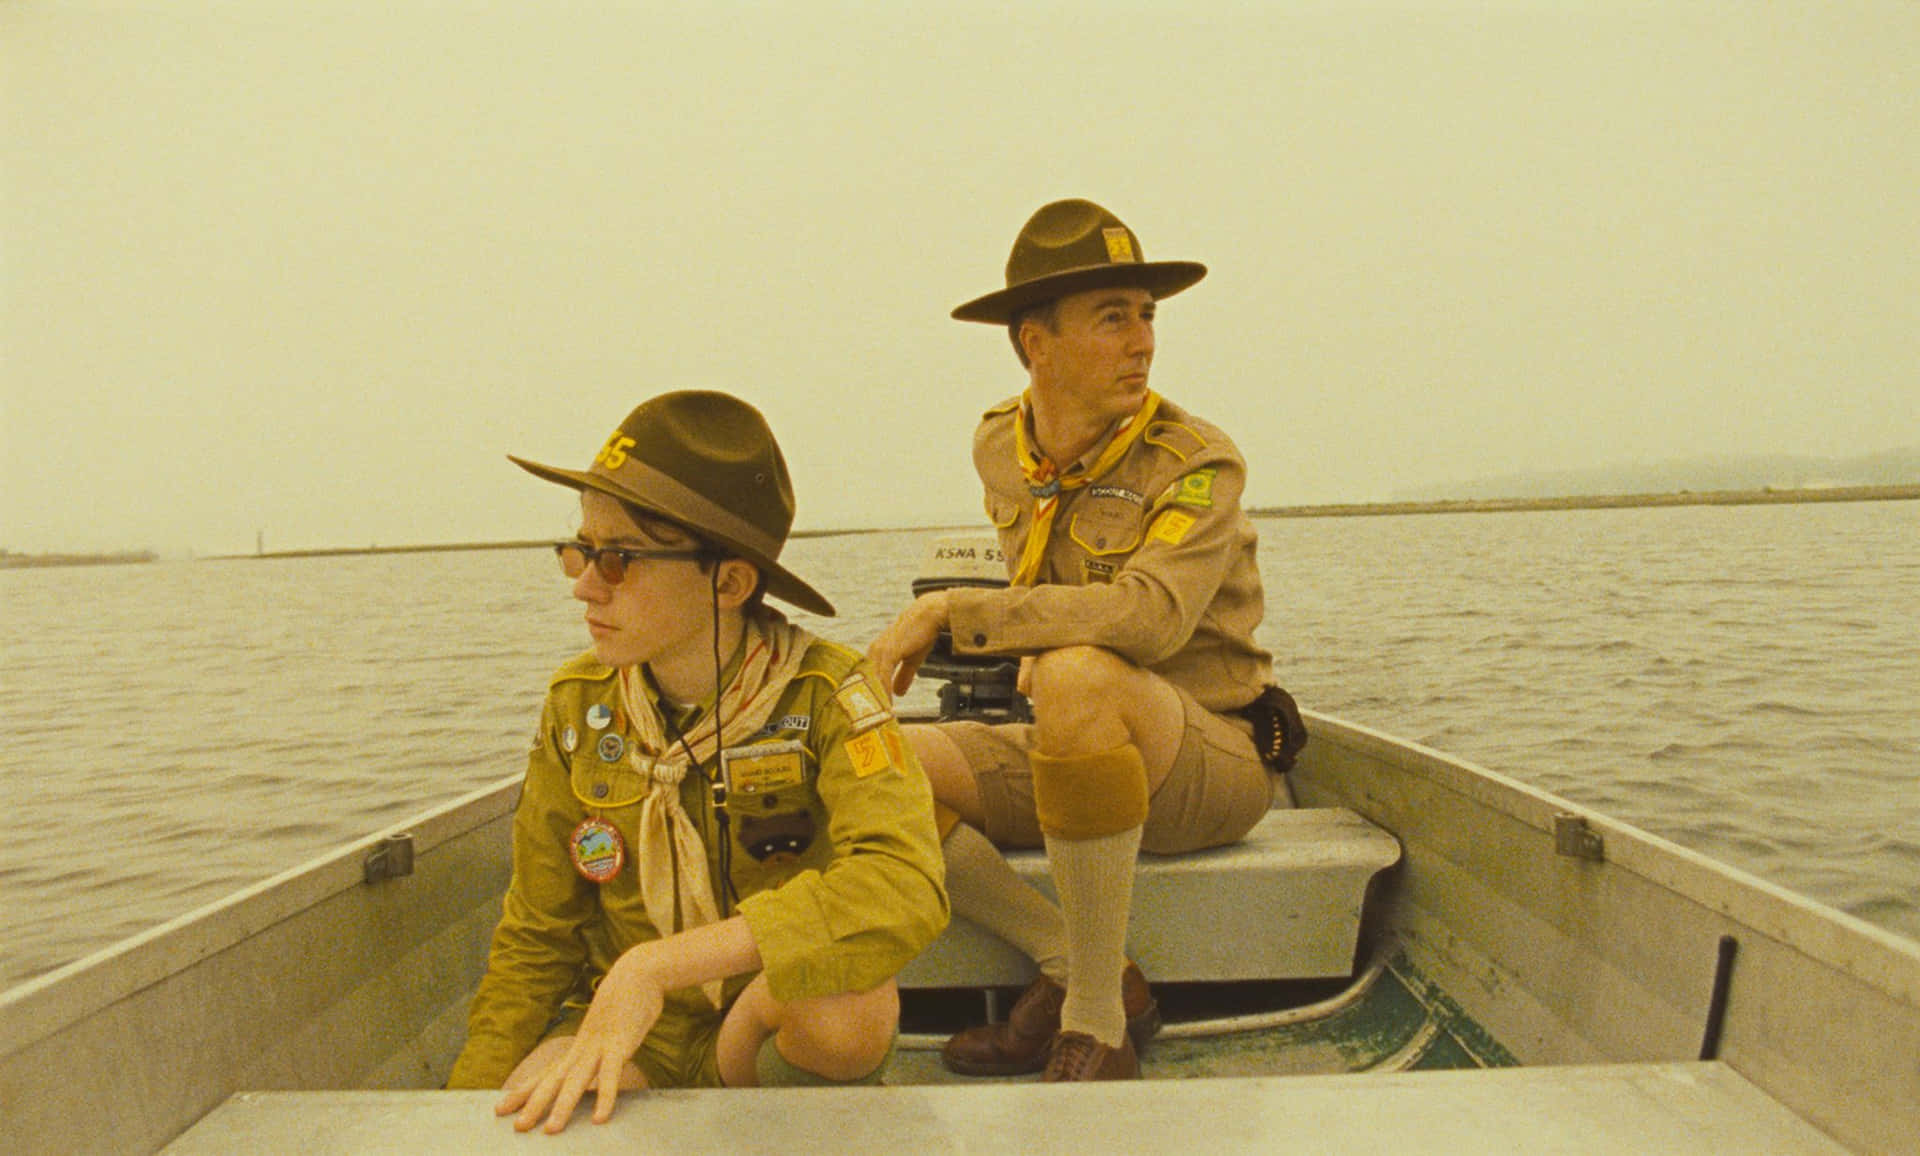 A Picturesque Scene From Wes Anderson's Moonrise Kingdom Wallpaper